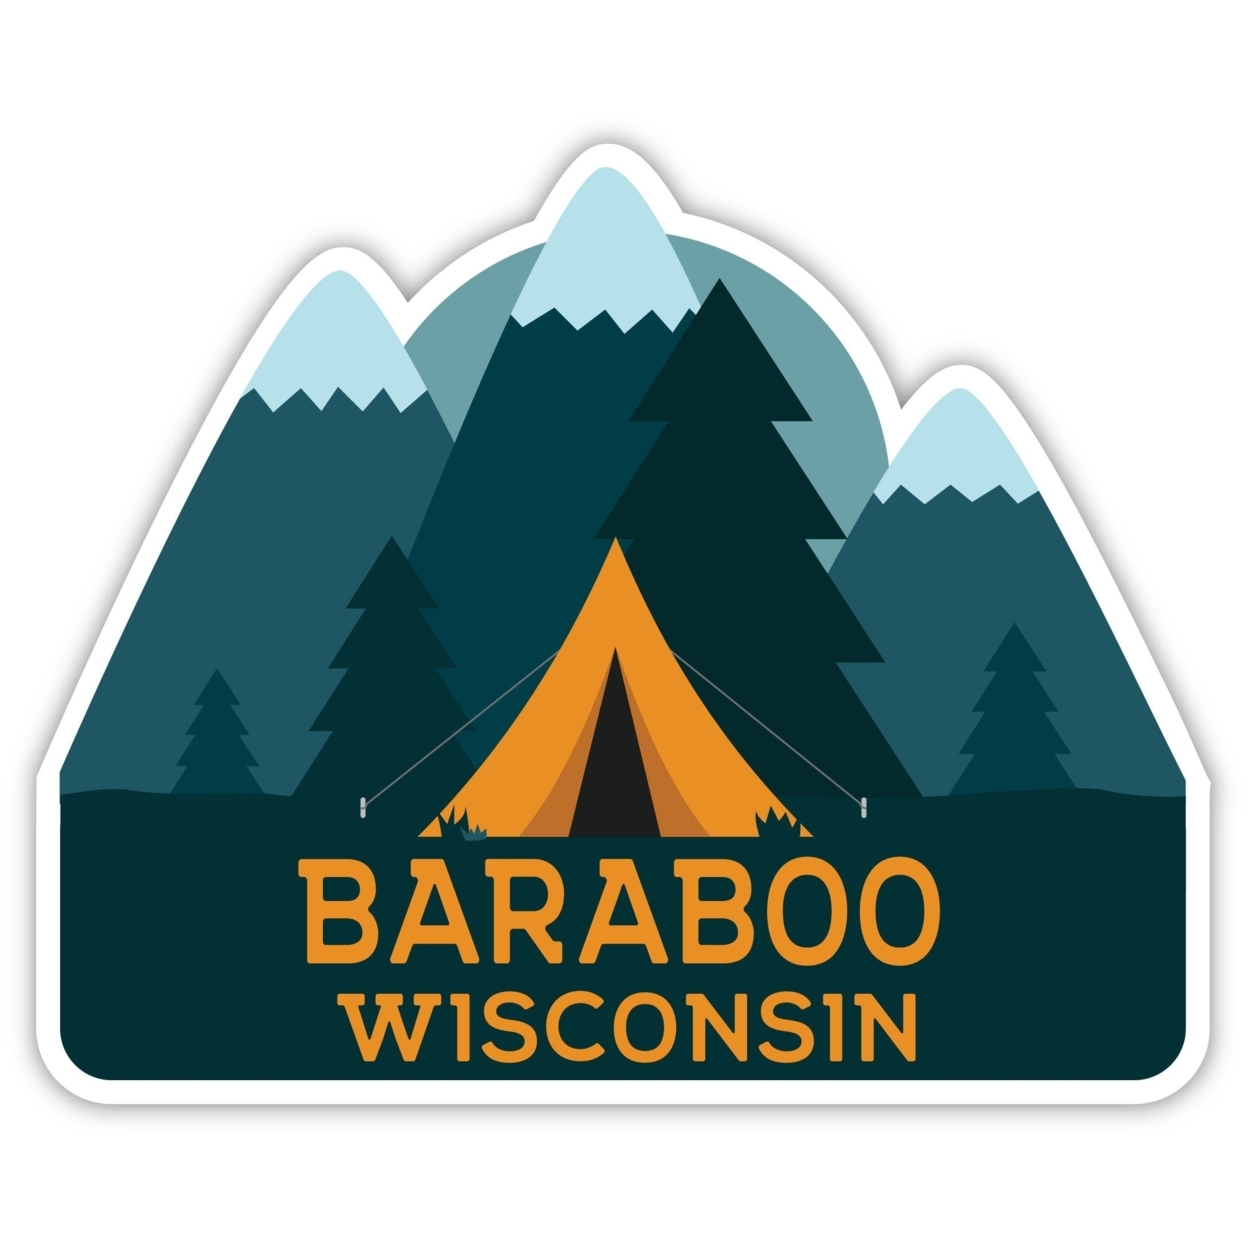 Baraboo Wisconsin Souvenir Decorative Stickers (Choose Theme And Size) - Single Unit, 2-Inch, Tent